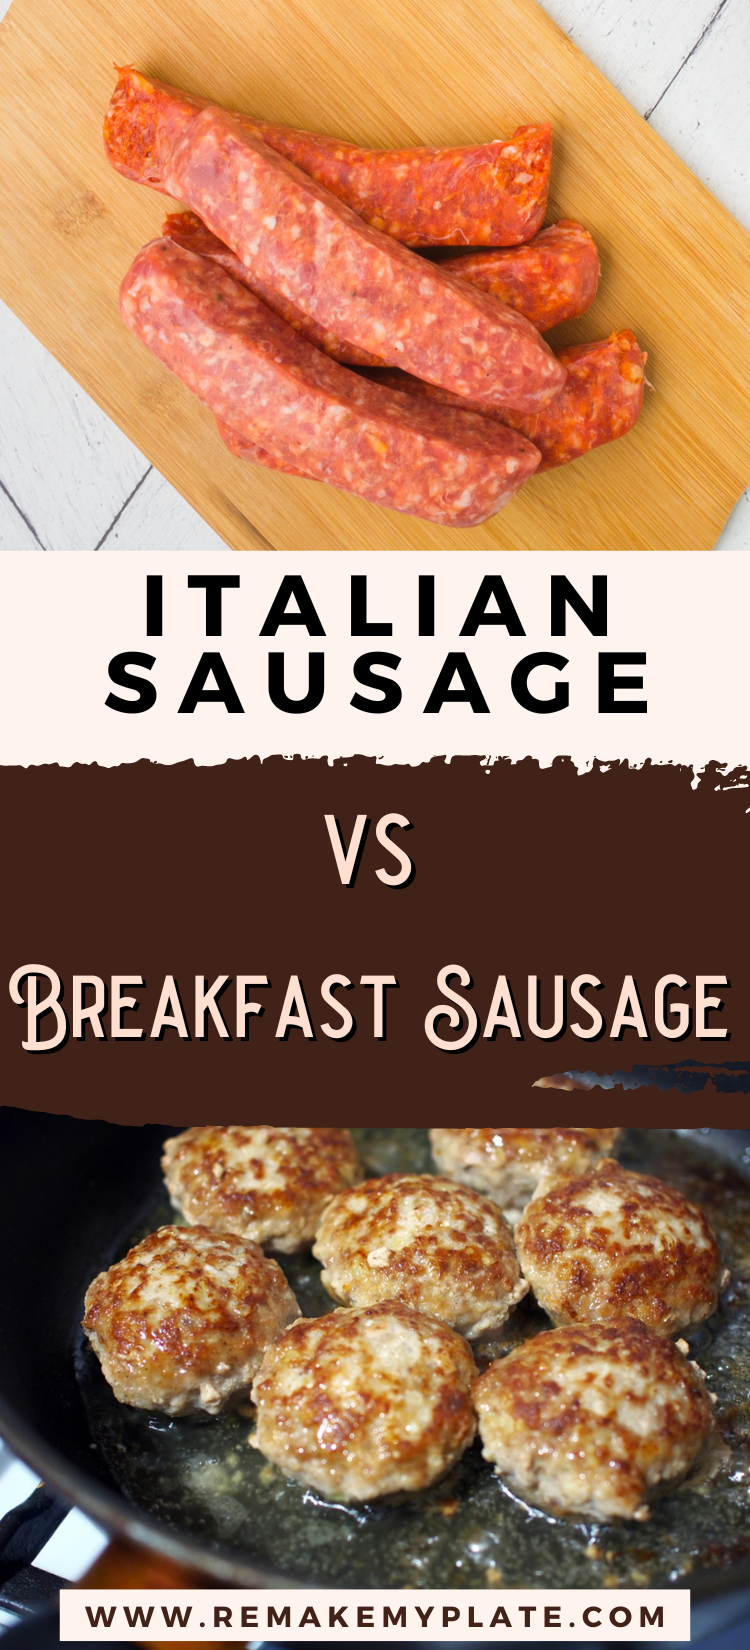 The differences between Italian Sausage vs Breakfast Sausage